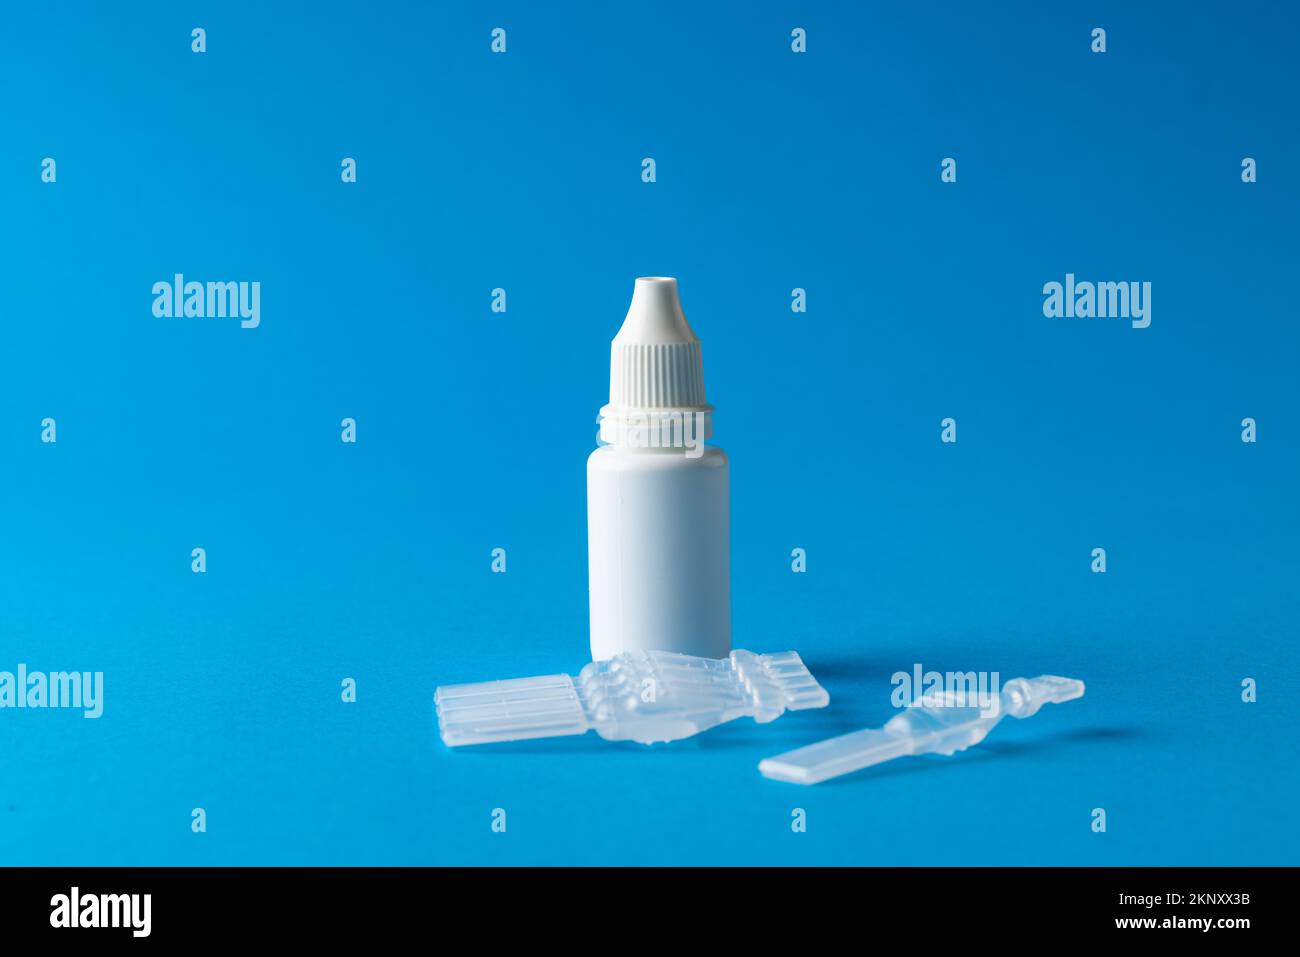 Composition of saline solution caplets and dropper bottle on blue background with copy space Stock Photo